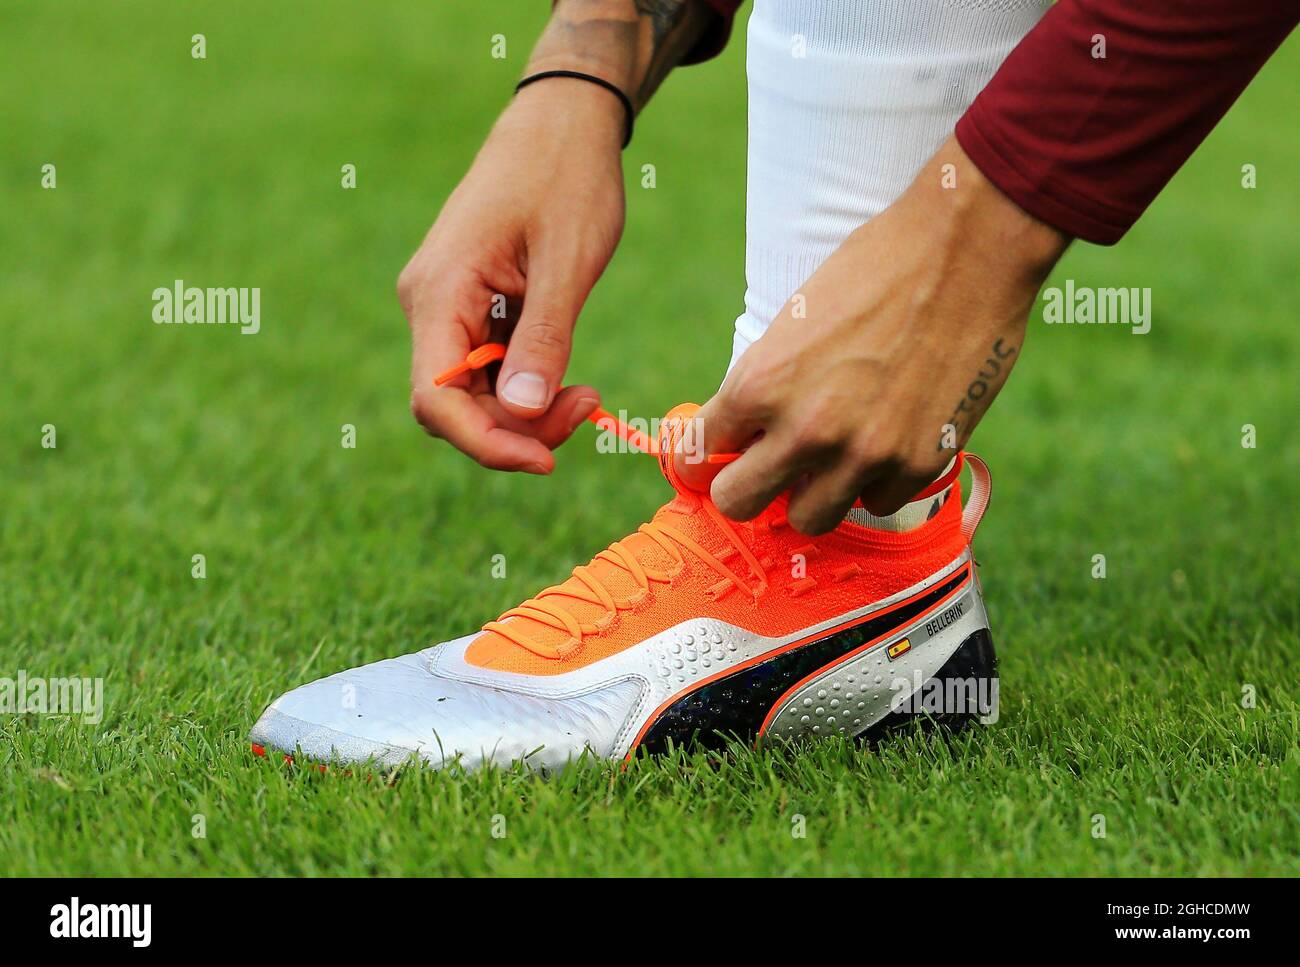 Puma Football High Resolution Stock Photography and Images - Alamy